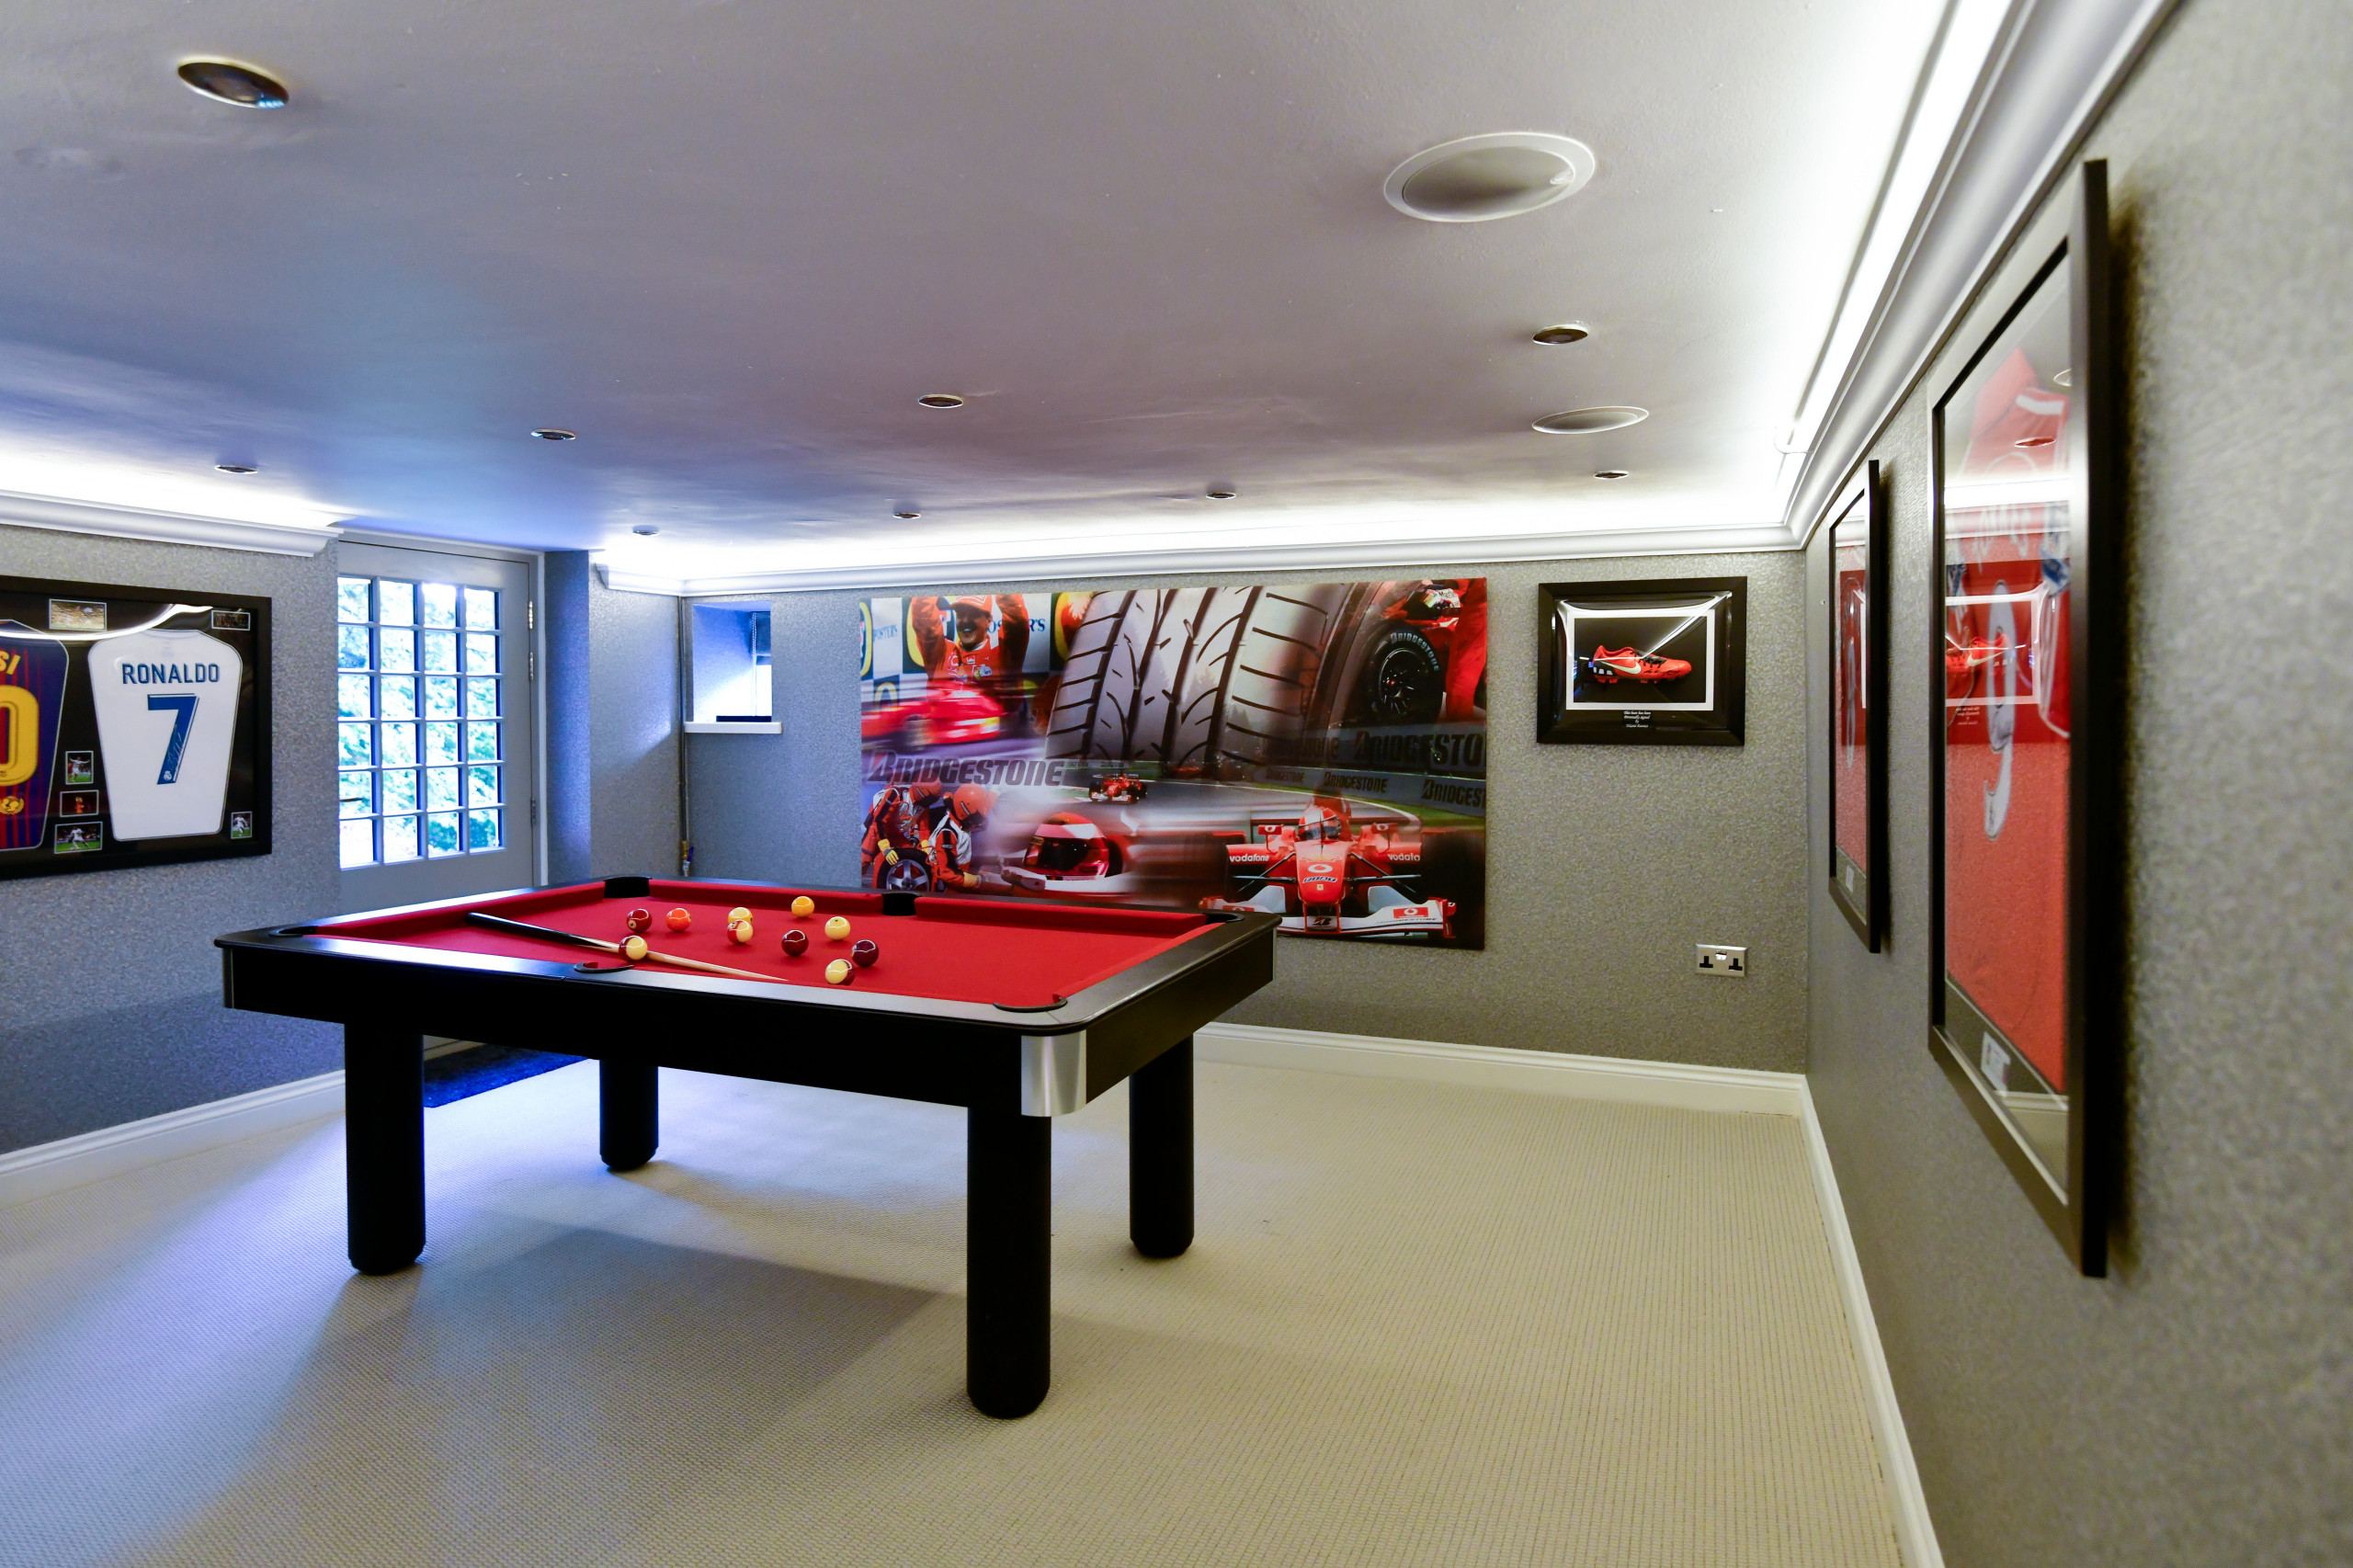 Liverpool FC / F1 Fan's Dream Games room - Modern - Family Room - Other -  by Cour Interior Design | Houzz